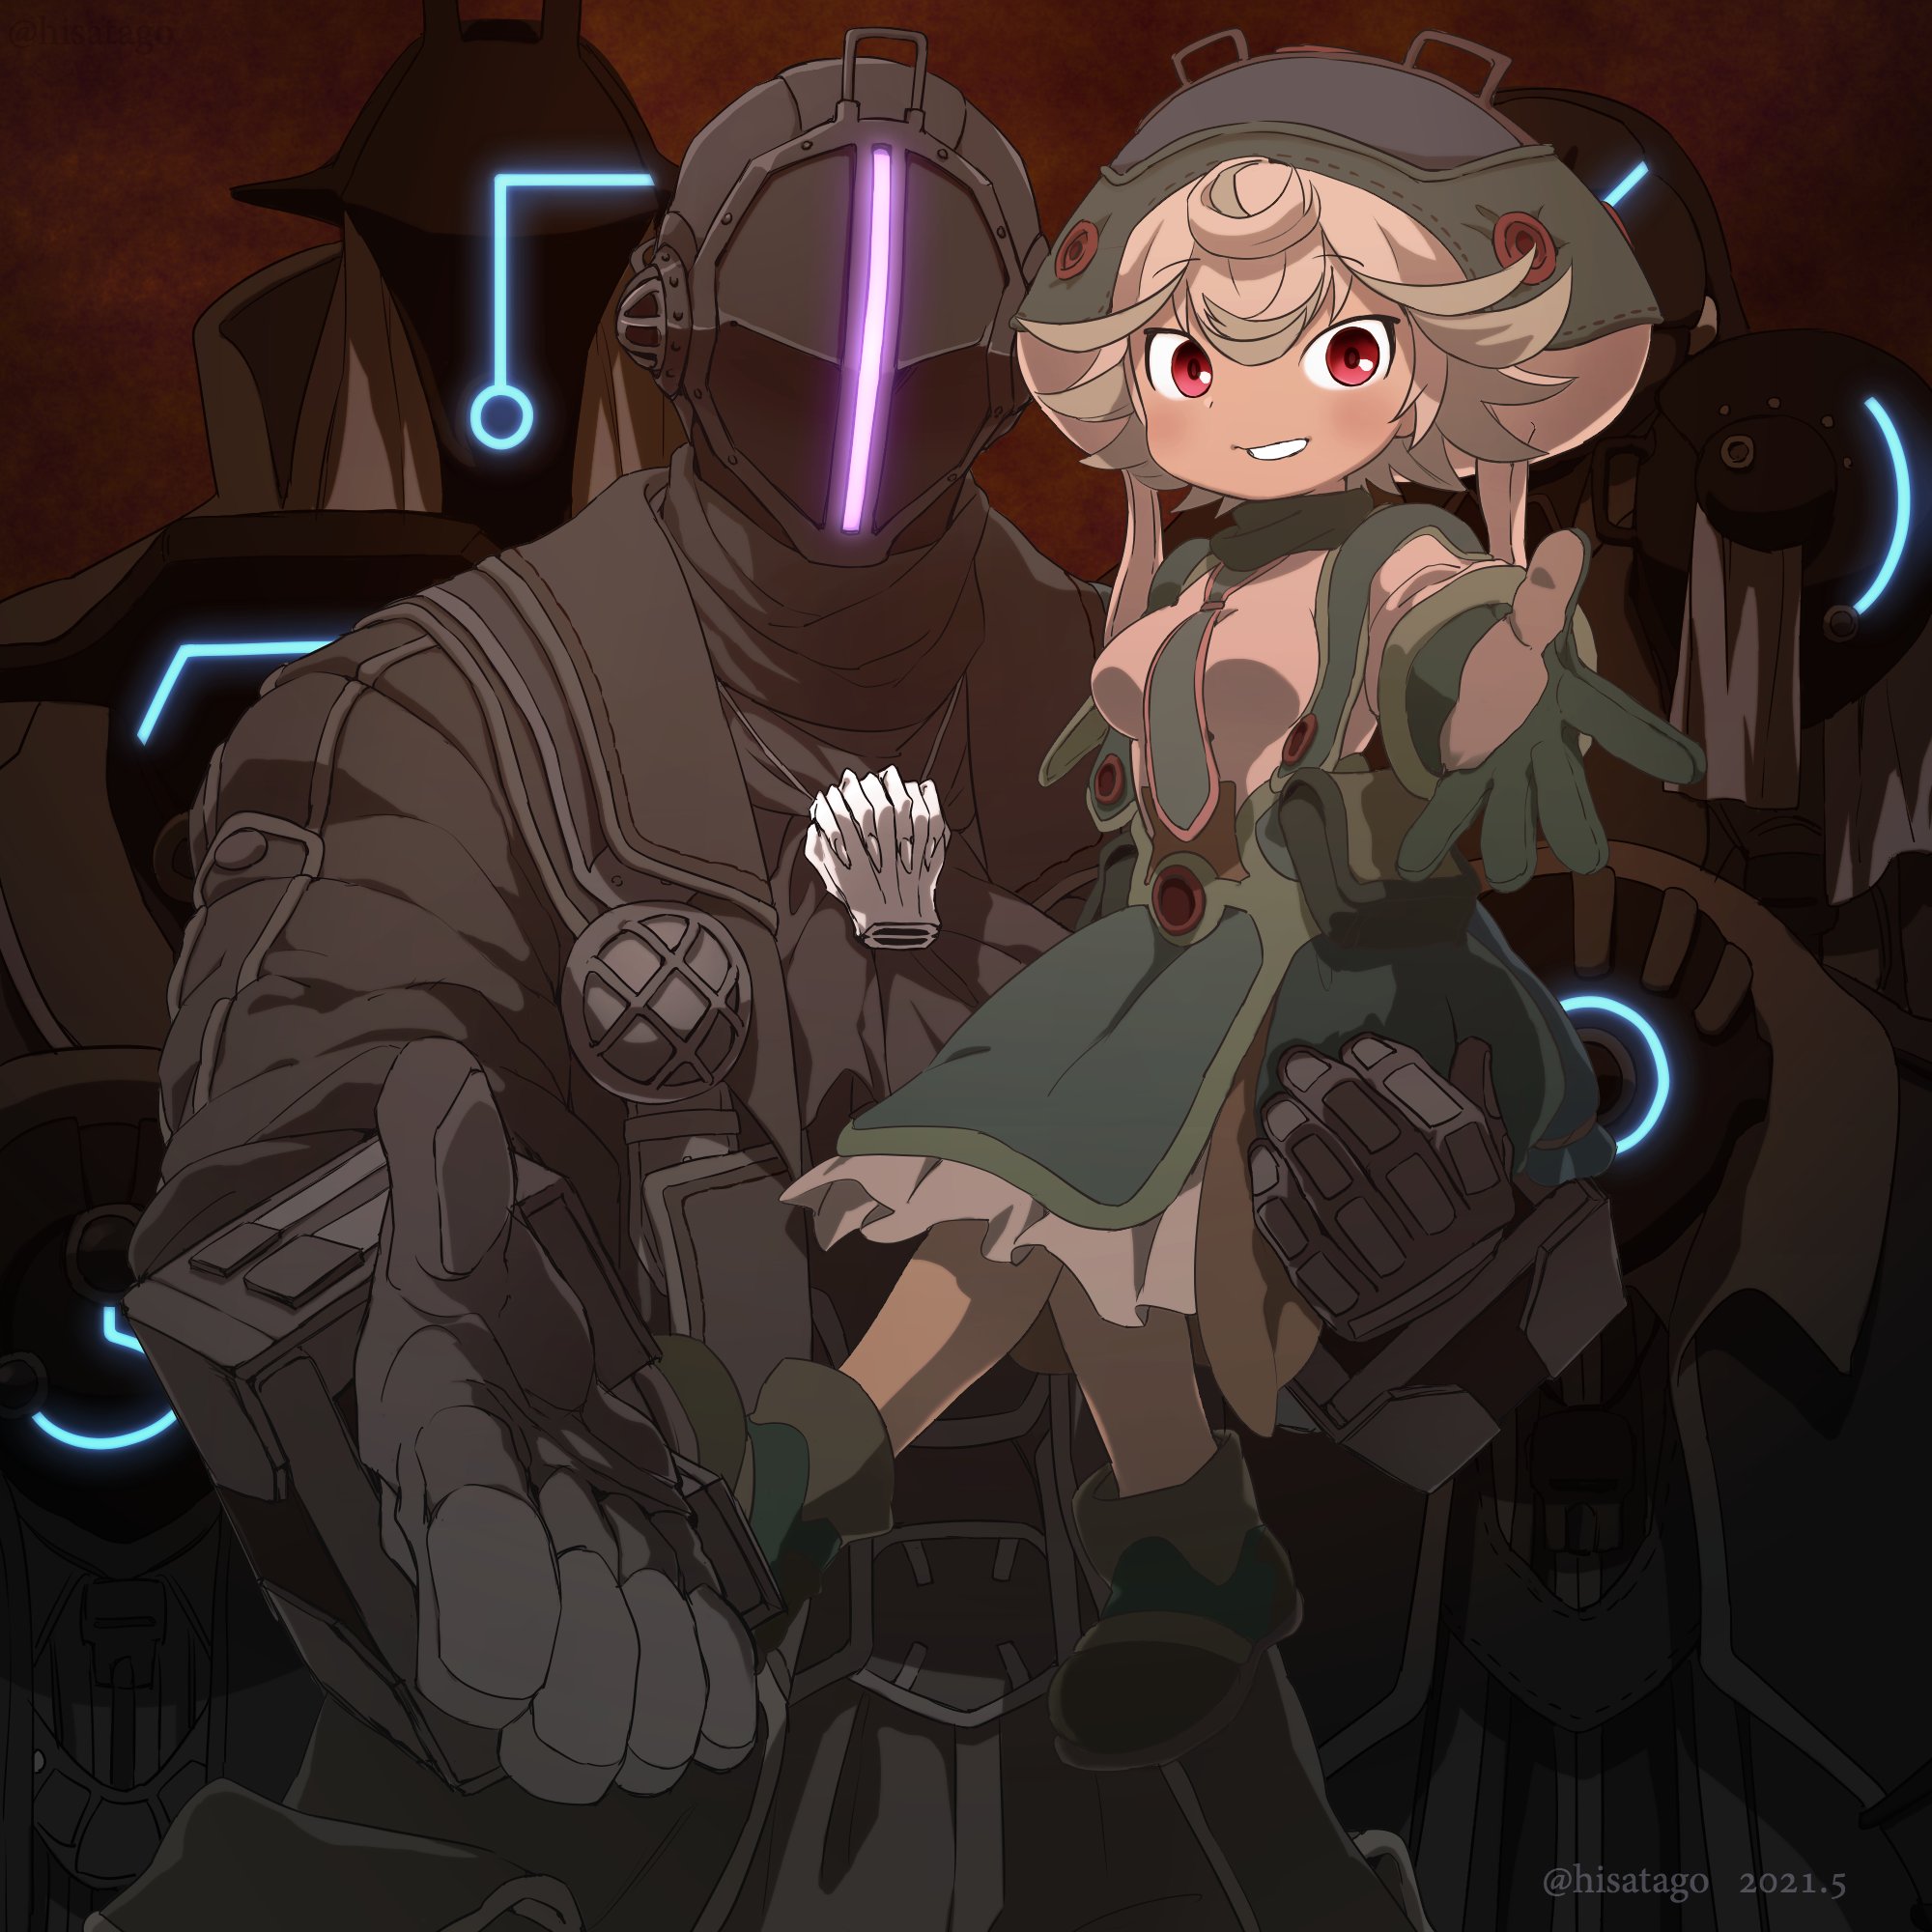 bondrewd, prushka, and gueira (made in abyss) drawn by saiko67